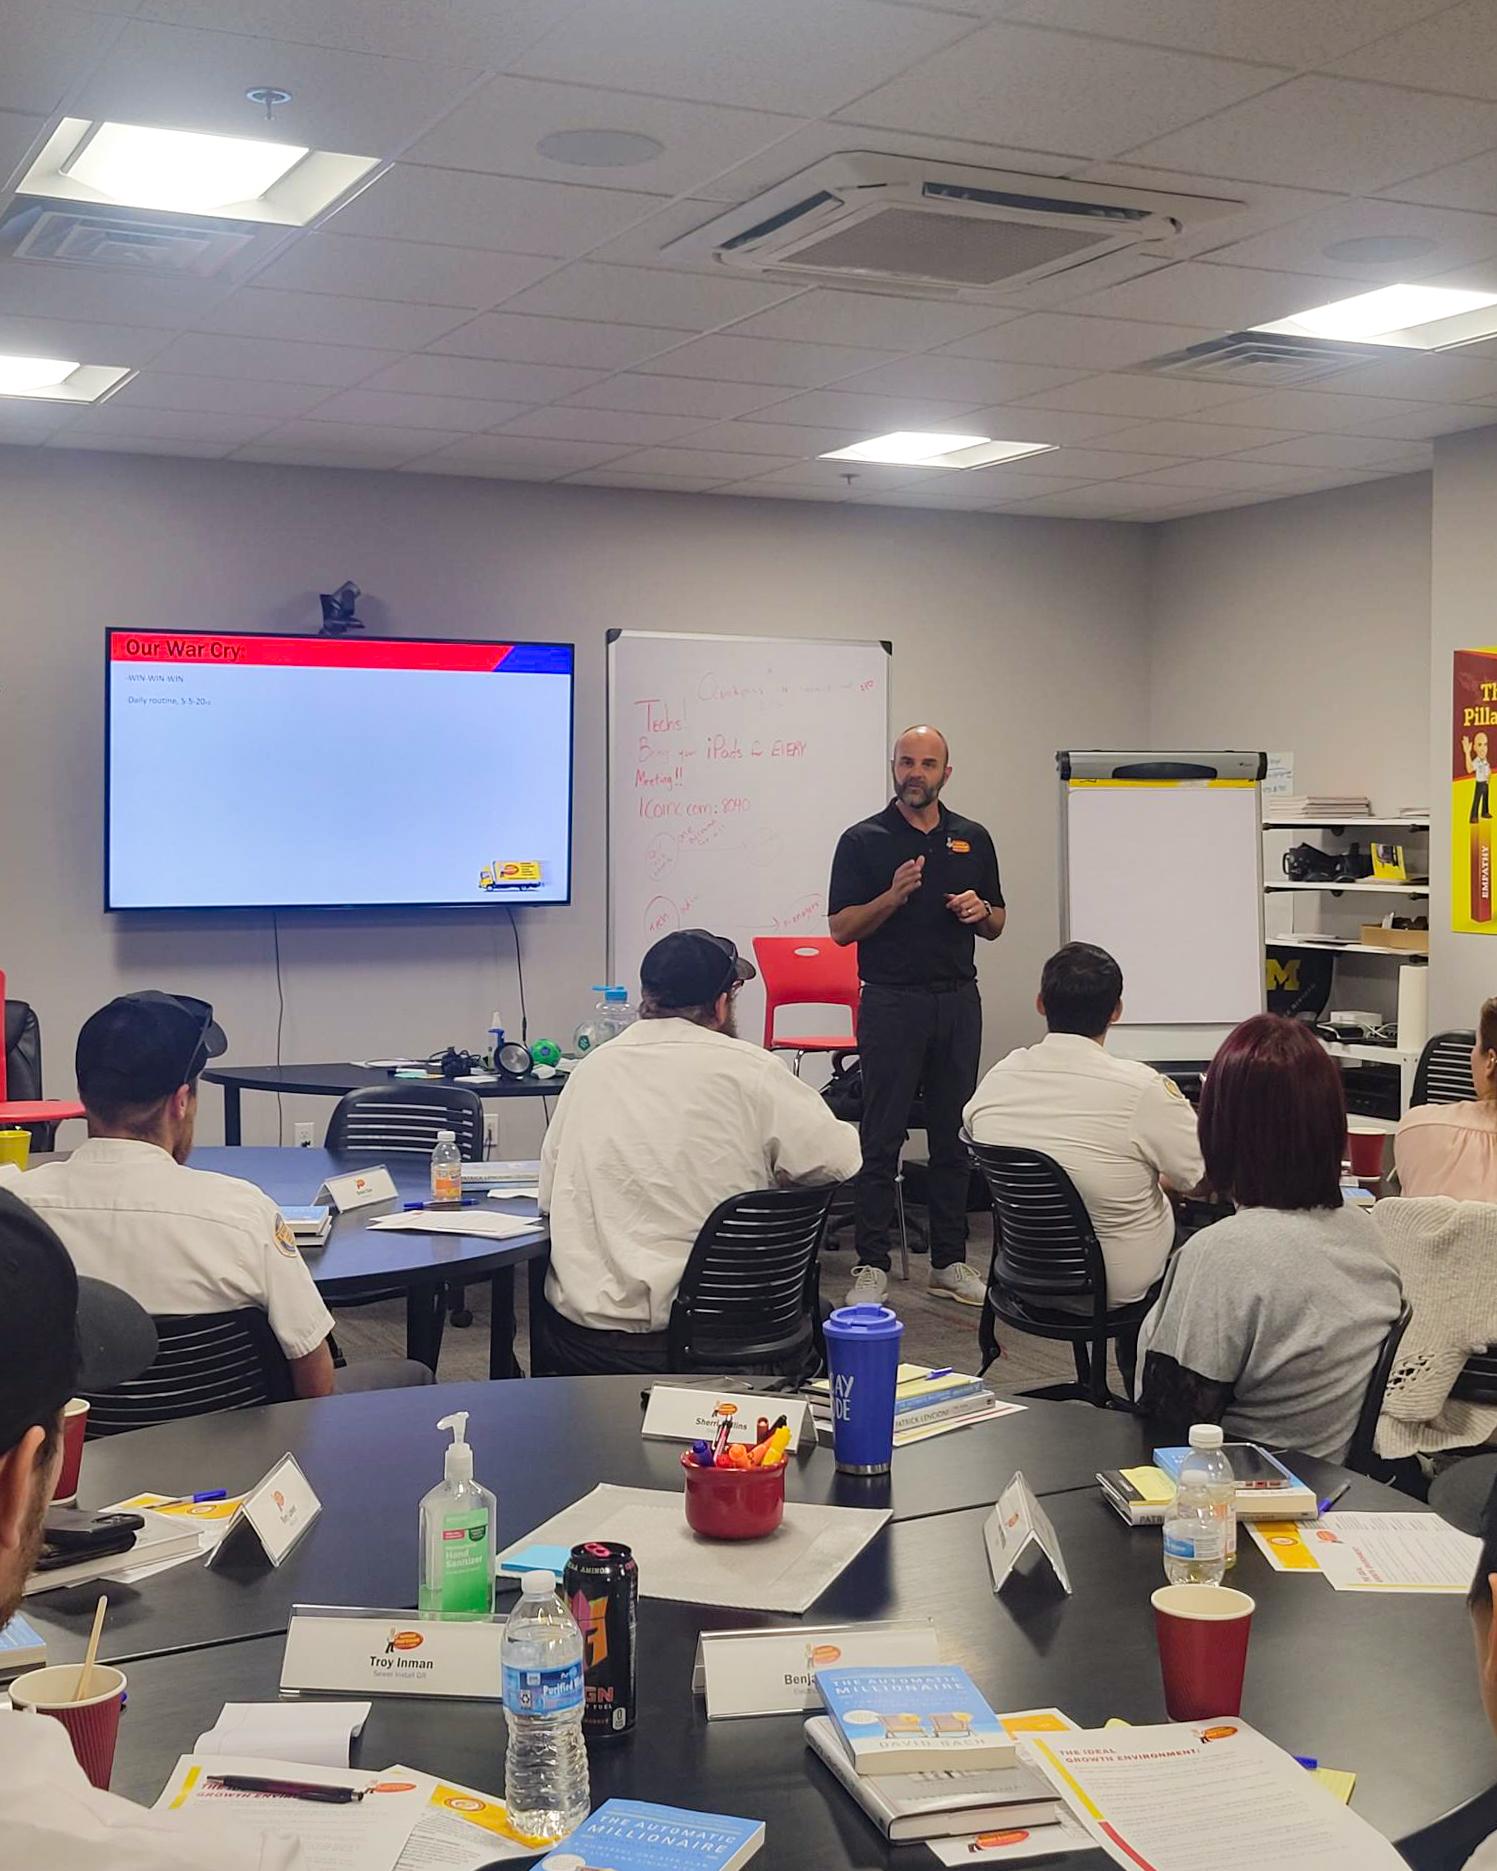 Inside the Service Professor training academy, a technician instructs a group of trainees.